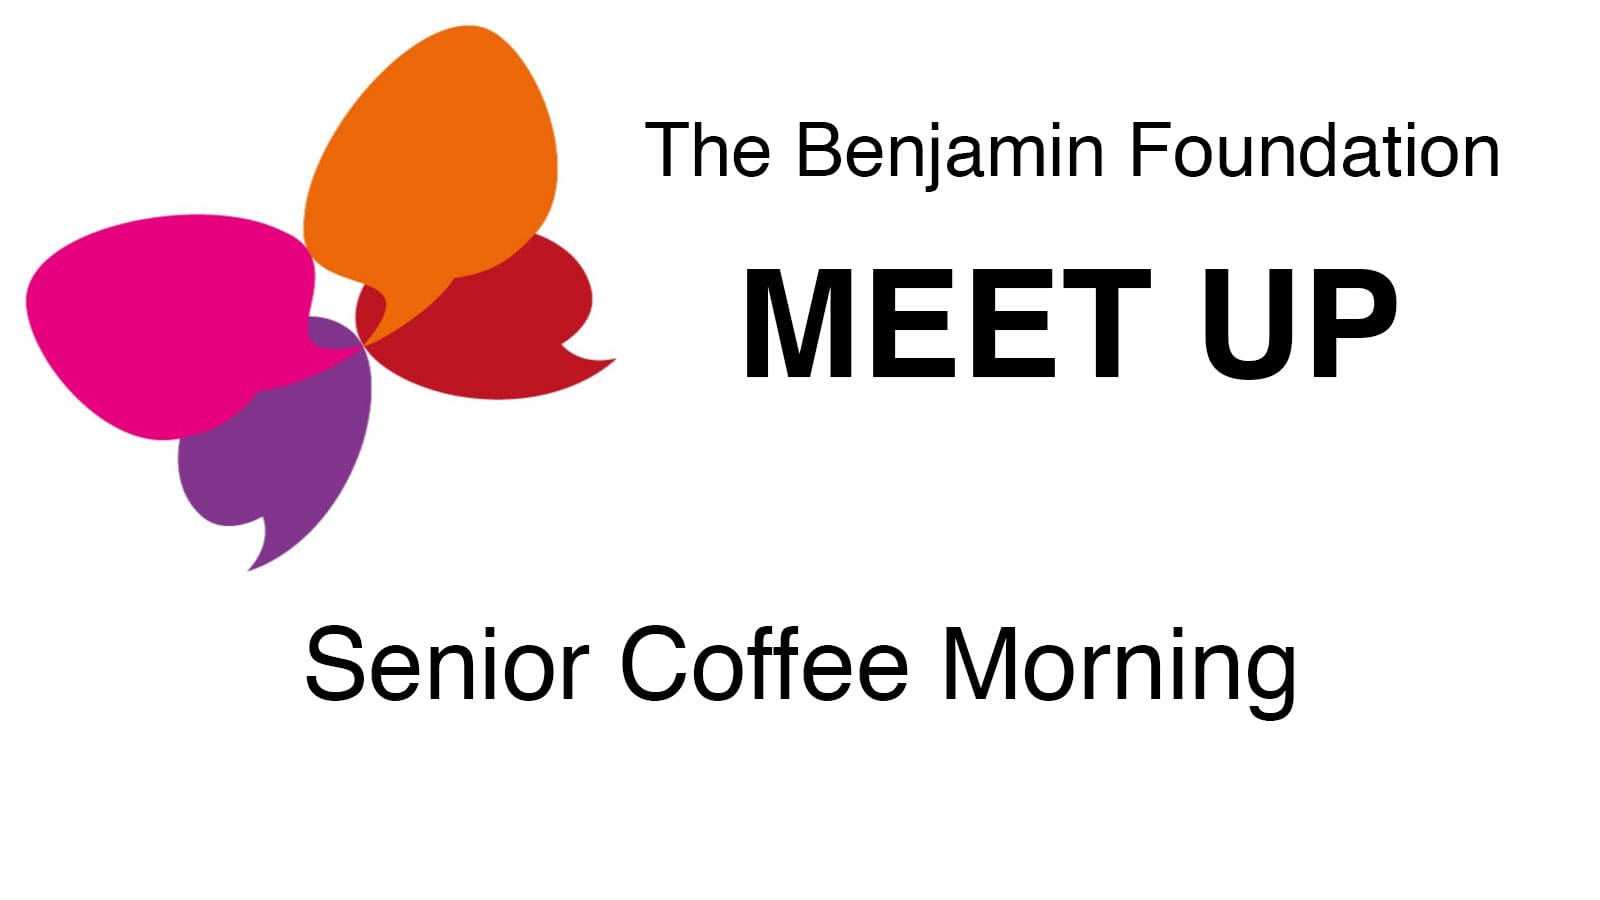 Thetford Bubbly Hub What's On and Events Meet Up Benjamin Wellbeing Coffee Senior